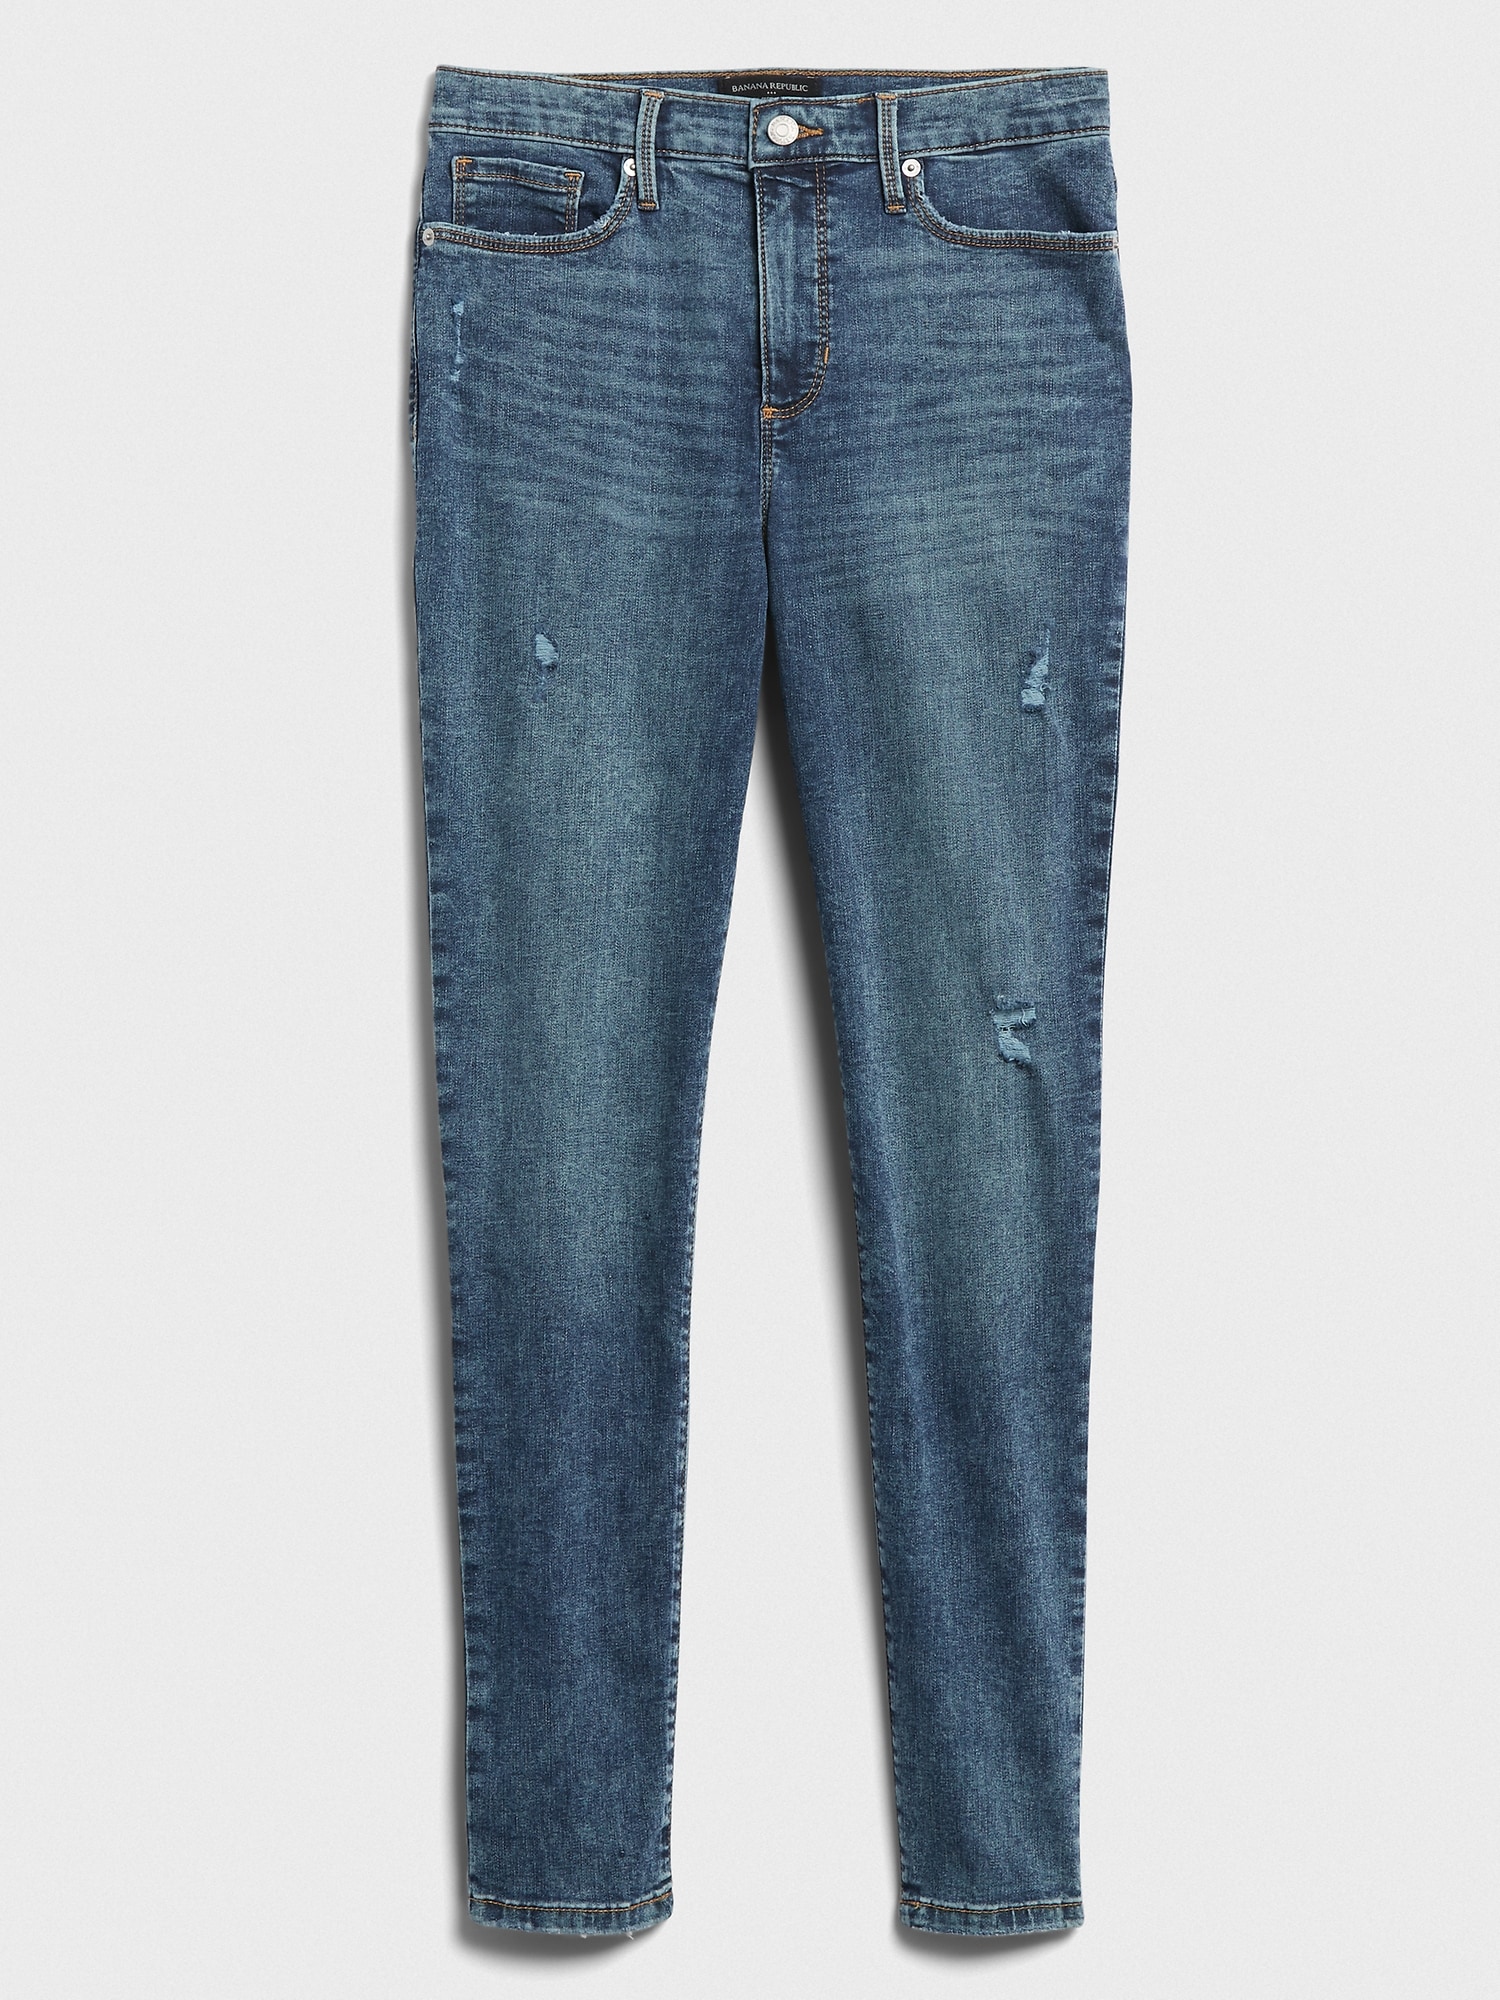 High-Rise Soft Touch Medium Wash Destructed Skinny Jean